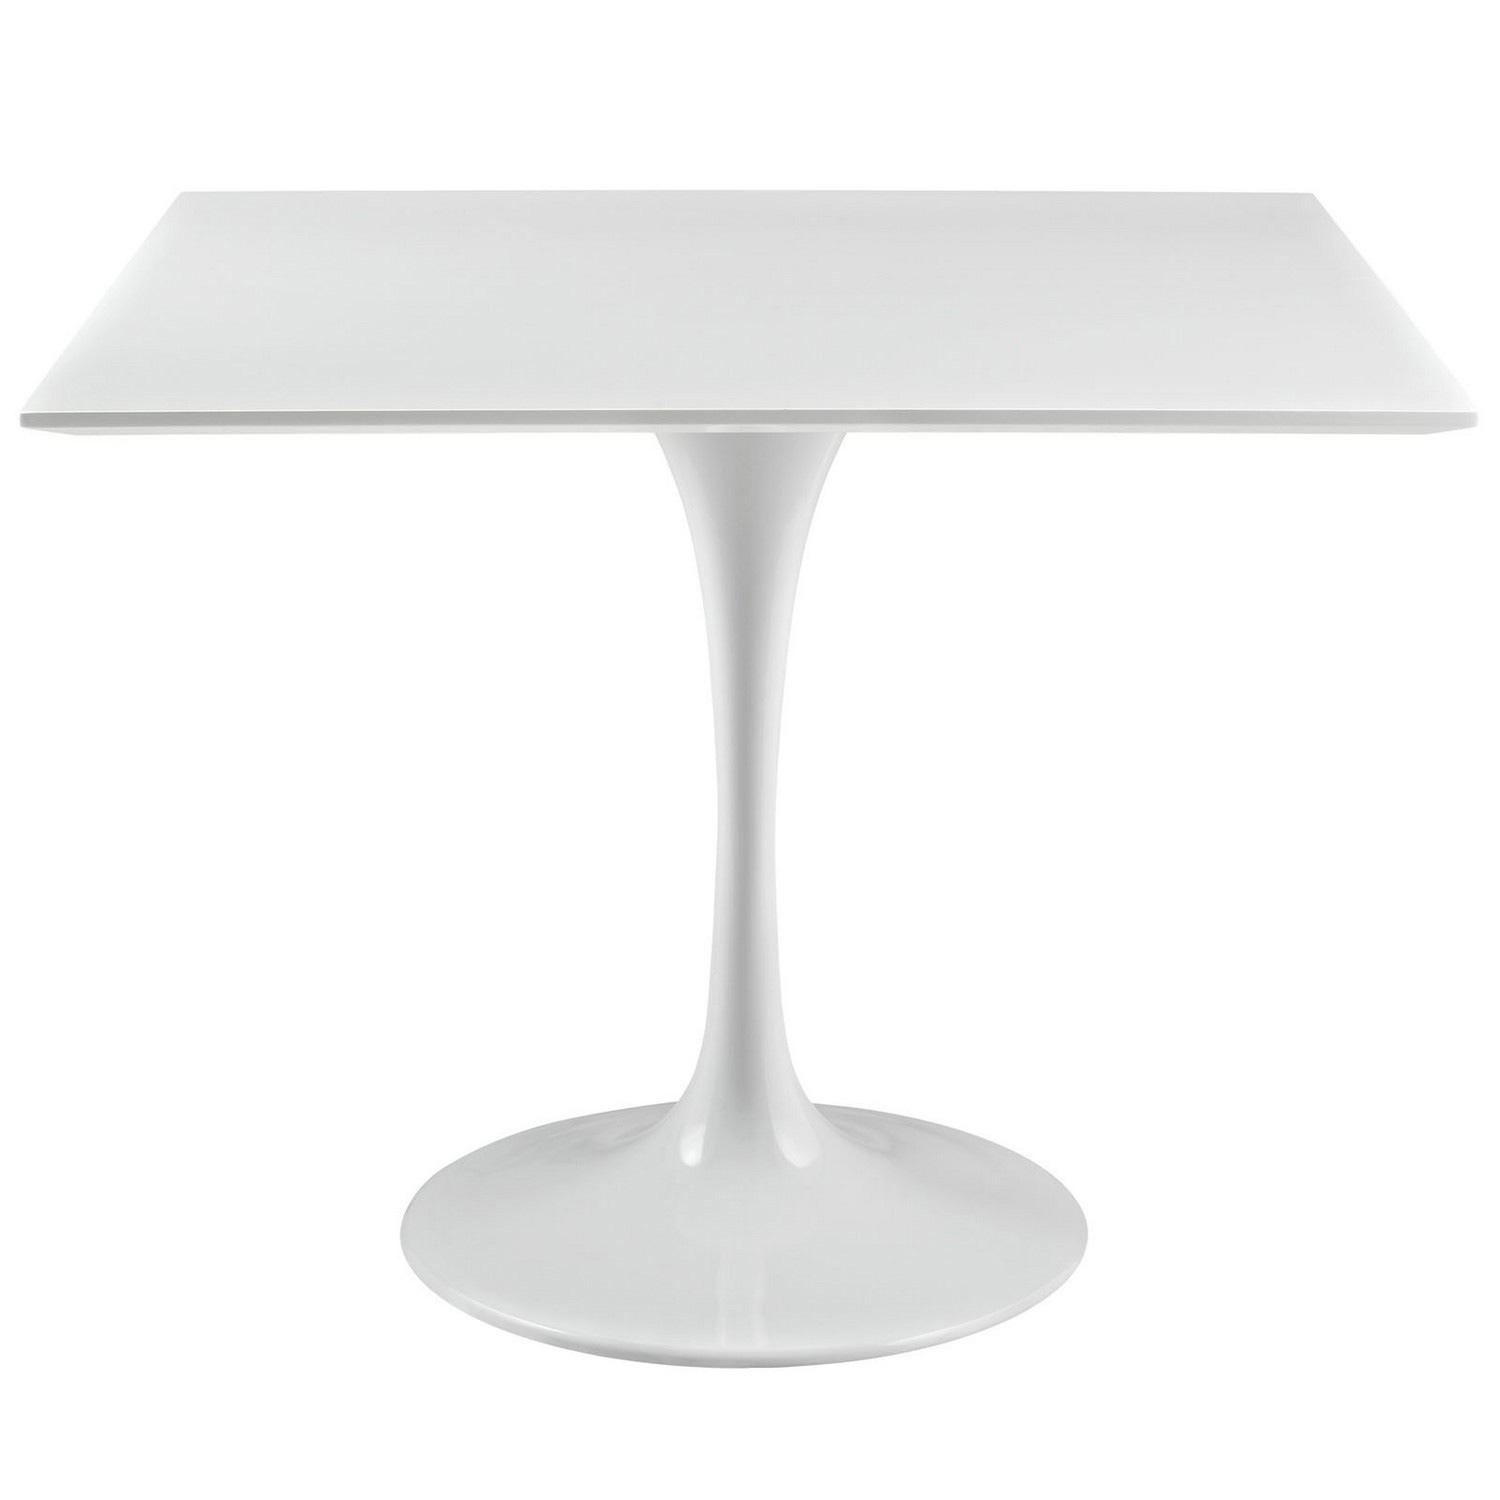 Modway Lippa 36 Square Wood Top Dining Table - White